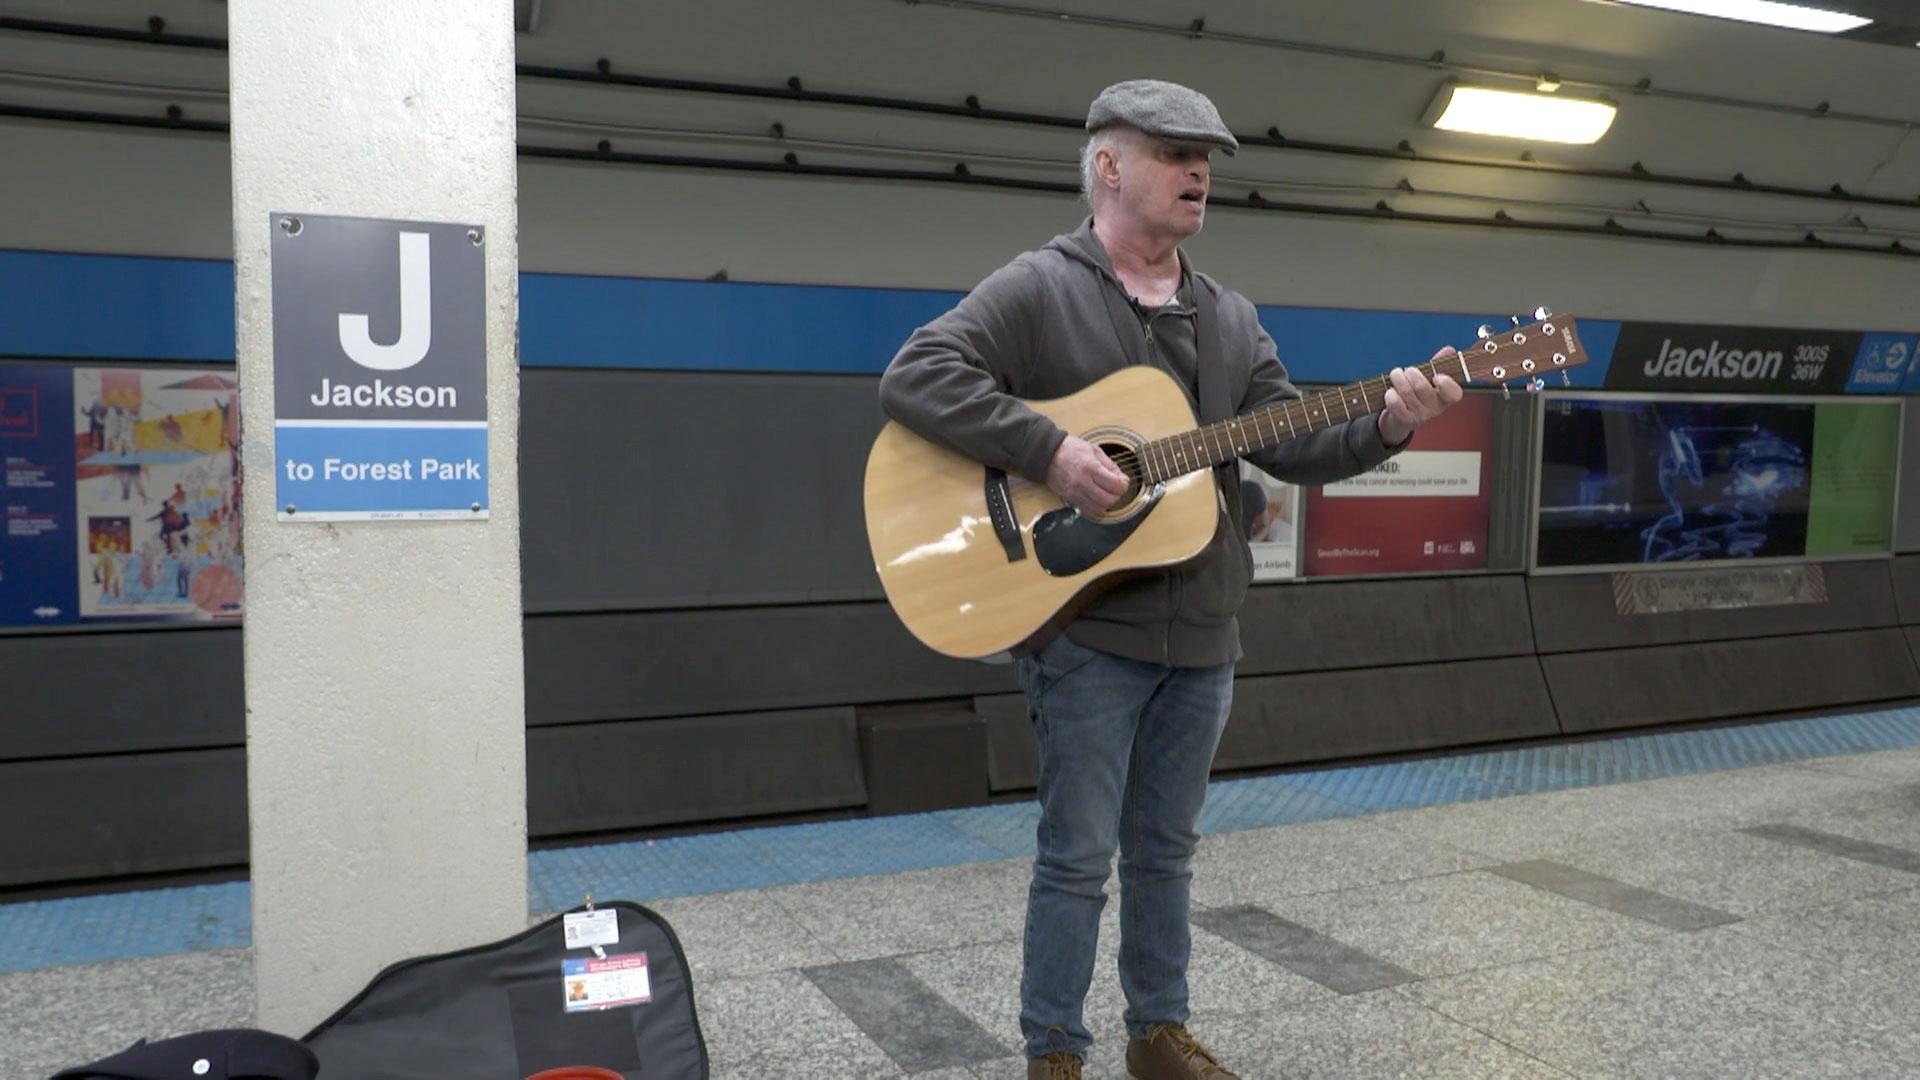 The Performers Who Fill the ‘L’ Tunnels with Music